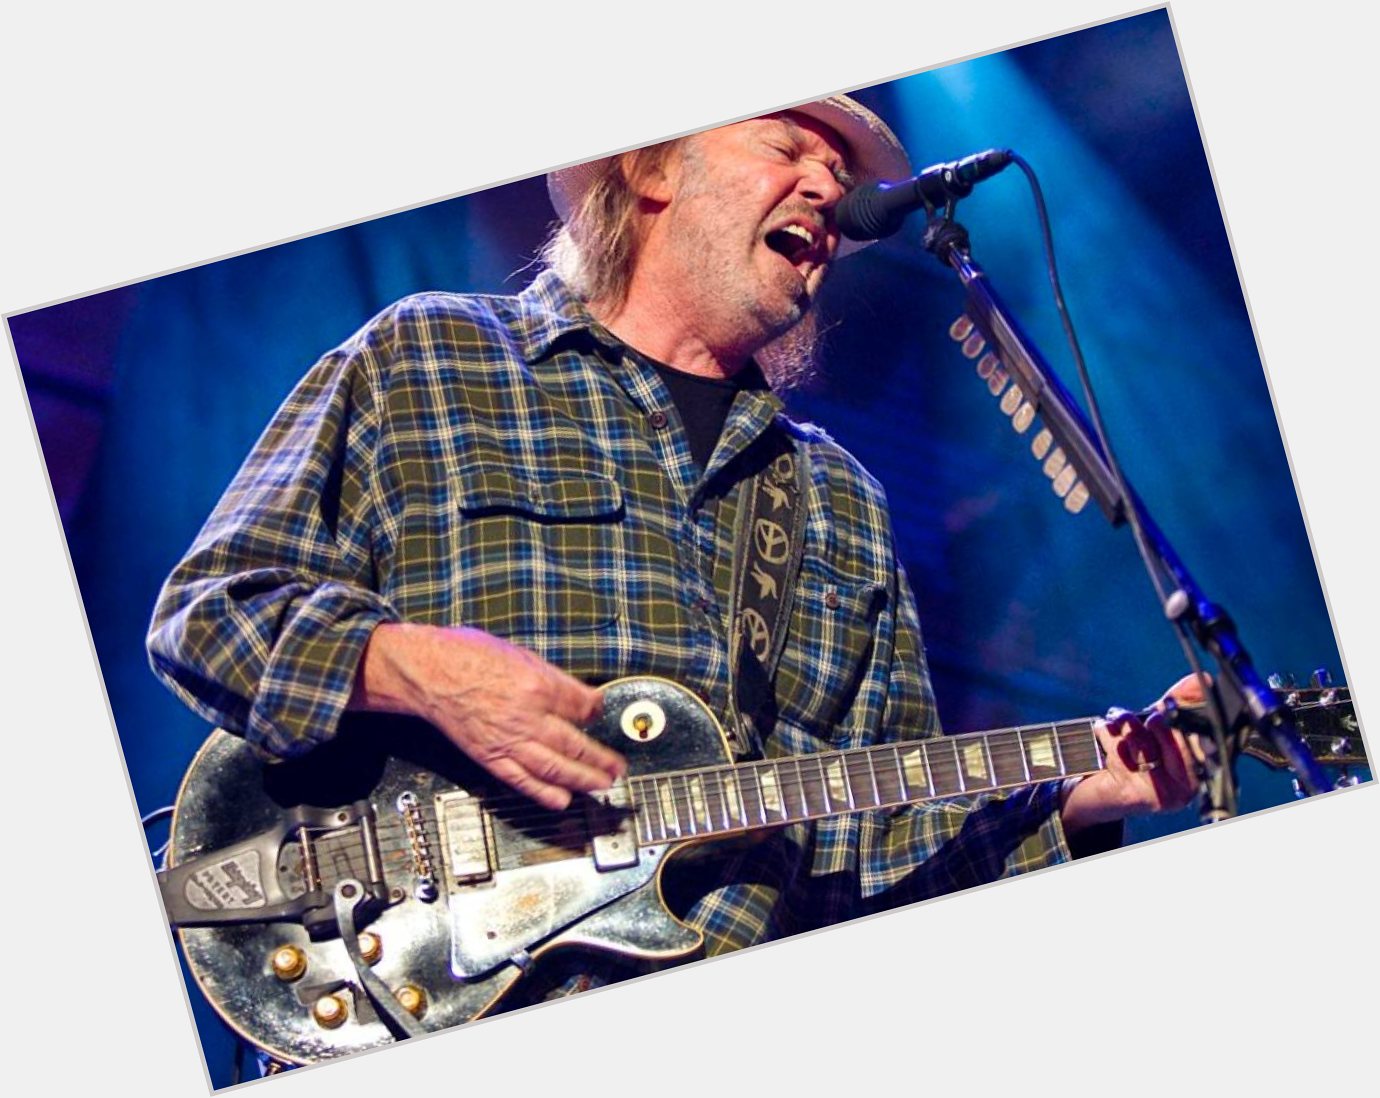 Happy birthday Neil Young!

What s your favorite Uncle Neil song? 